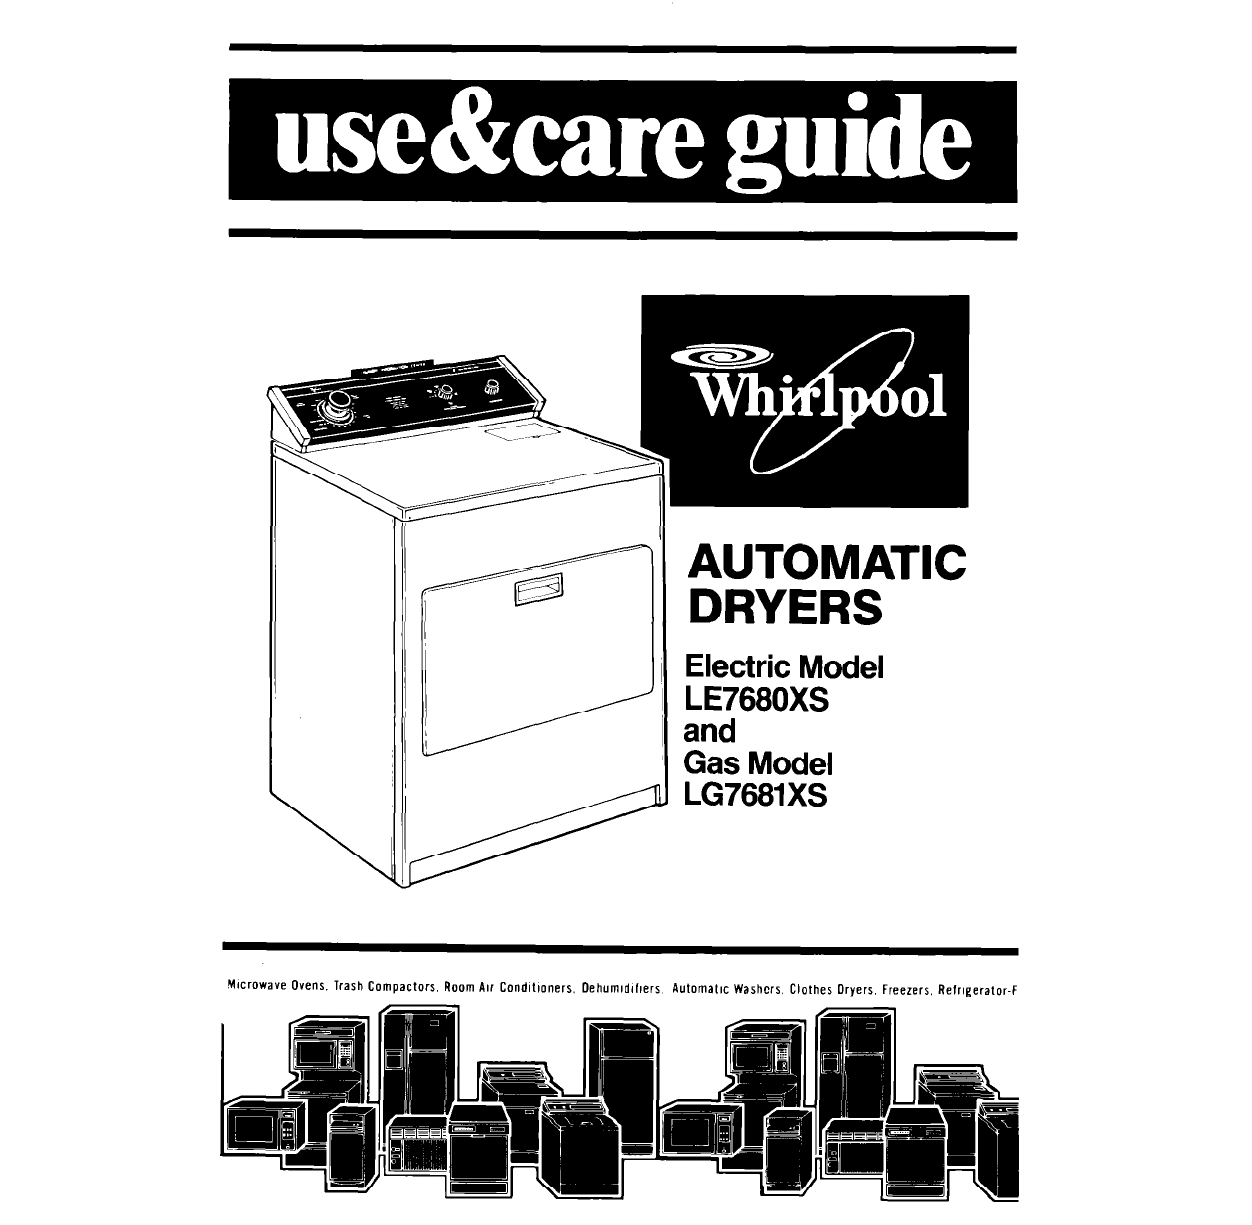 Dryer manual for whirlpool gas and electric dryers